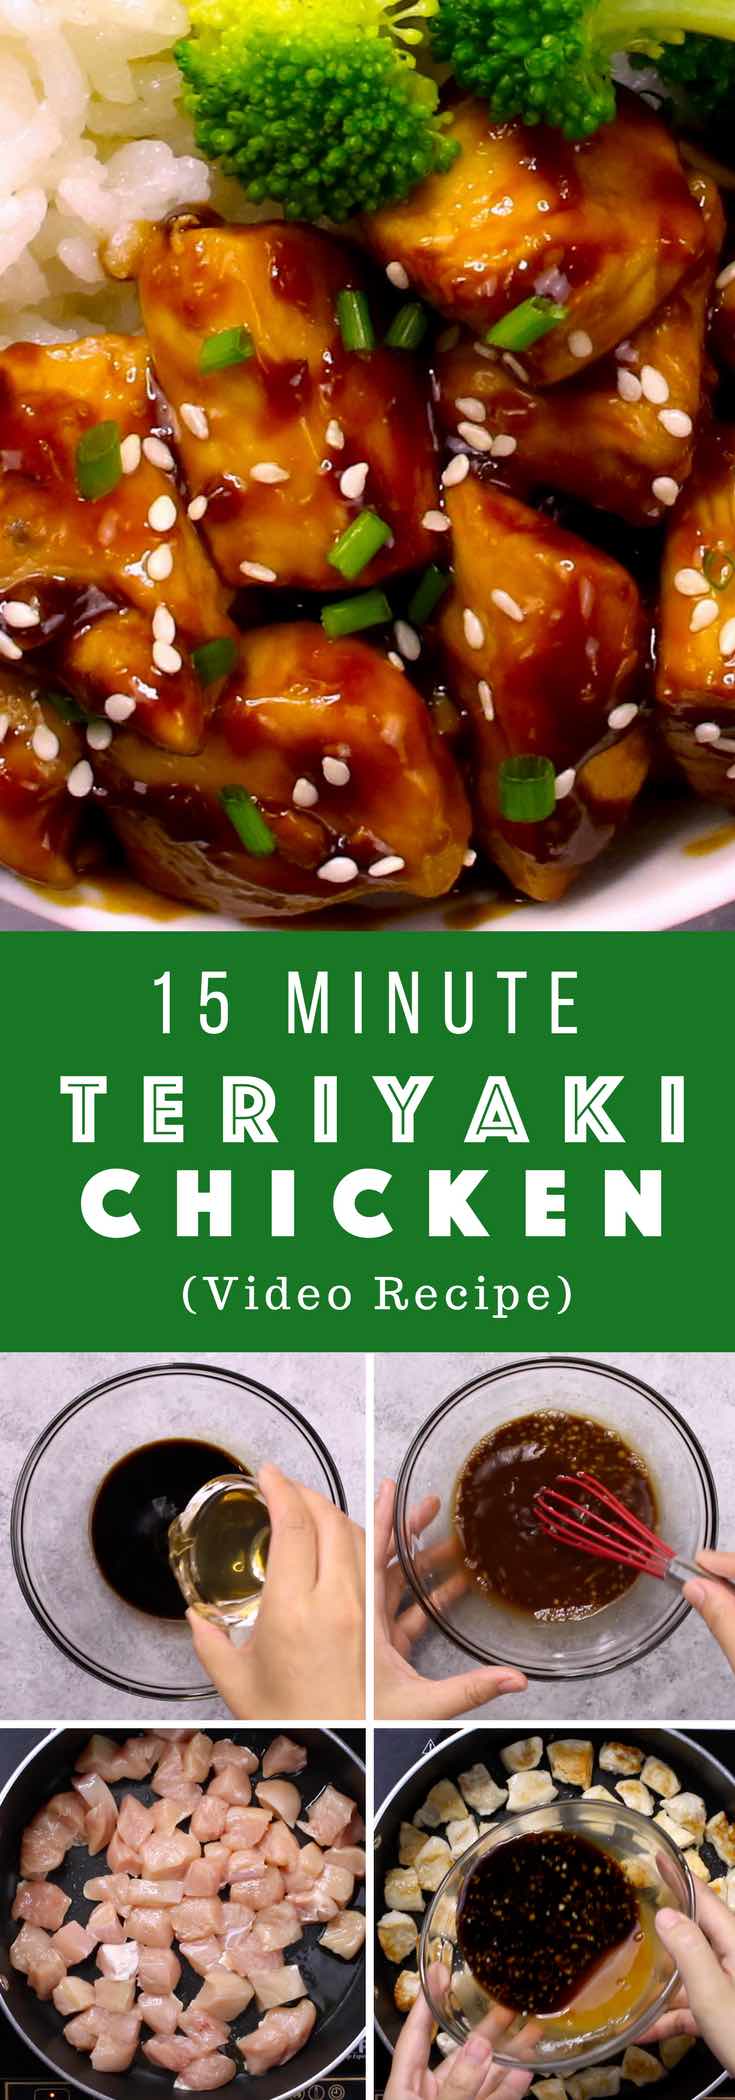 The easiest, most unbelievably delicious Teriyaki Chicken with Rice Bowls. And it’ll be on your dinner table in just 15 minutes. It’s much better than takeout! All you need is only a few ingredients: chicken breast, soy sauce, cider vinegar, honey and cornstarch. One of the best Asian dinner ideas! Served with rice and broccoli. Quick and easy dinner recipe. Video recipe. | Tipbuzz.com #Teriyaki #TeriyakiChicken #ChickenTeriyaki